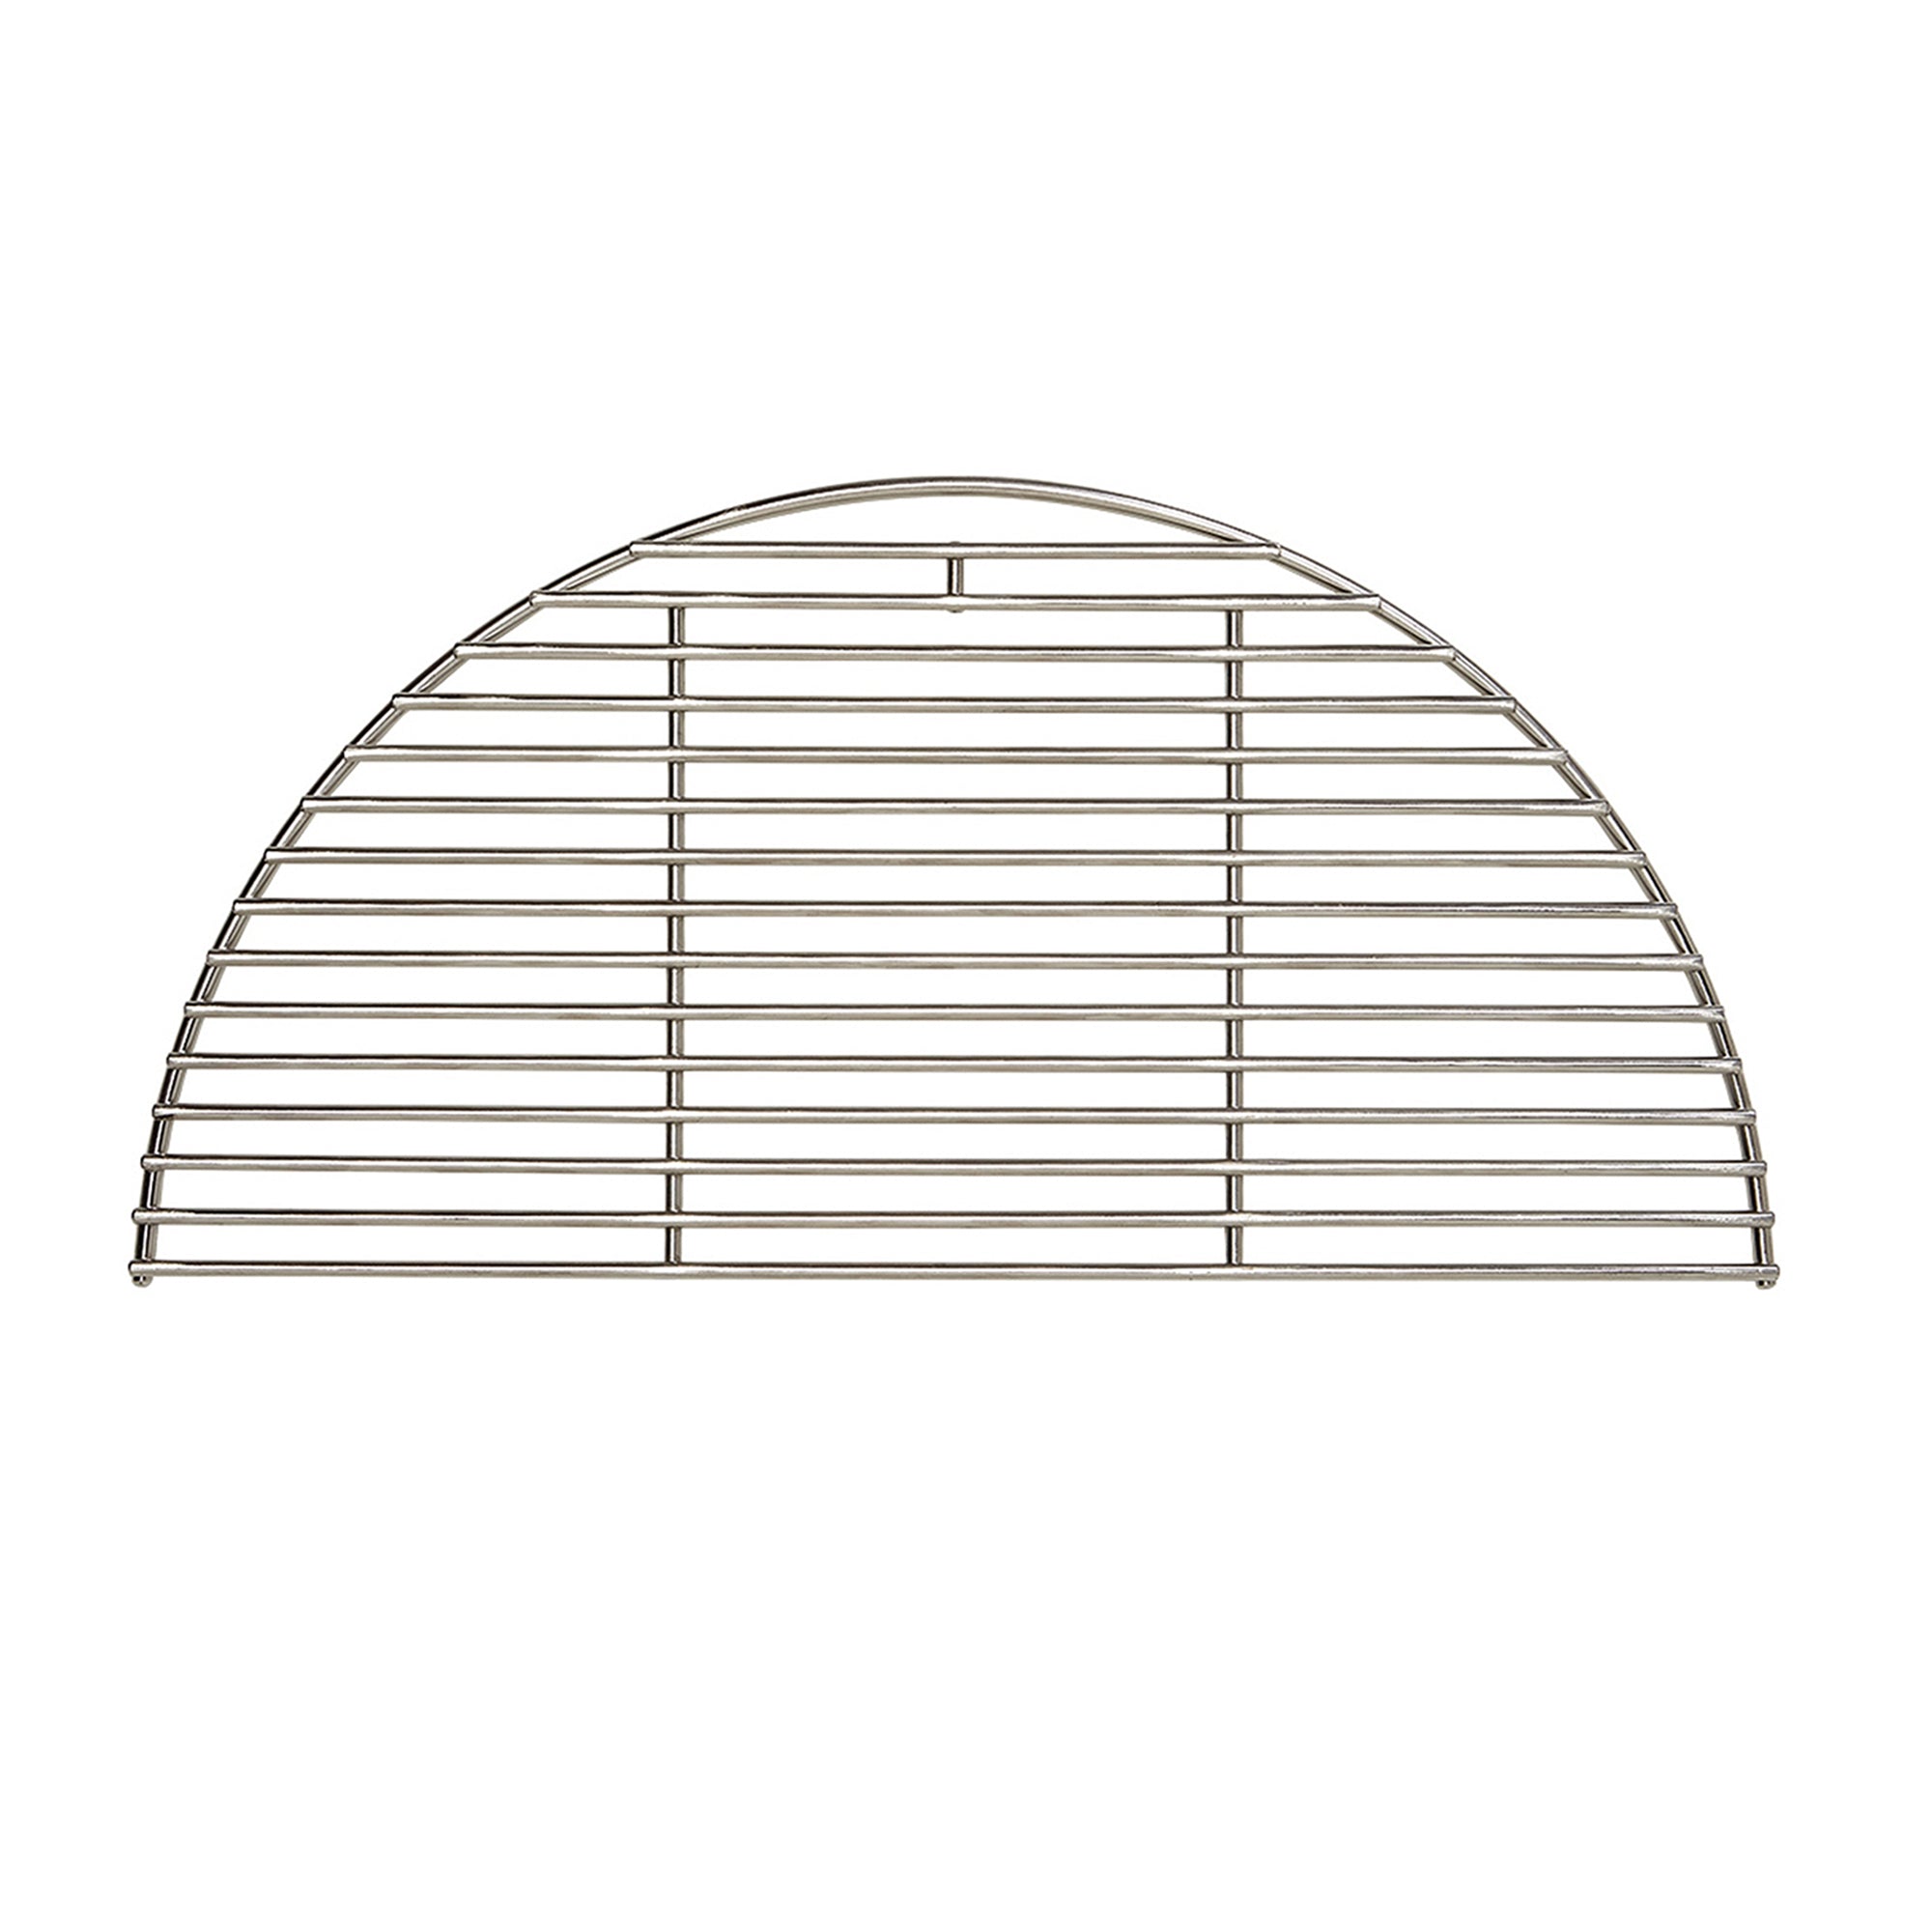 Details about   Stainless Steel Round Grill Grate Cooking Grid Part for Classic Kamado Grill 13" 